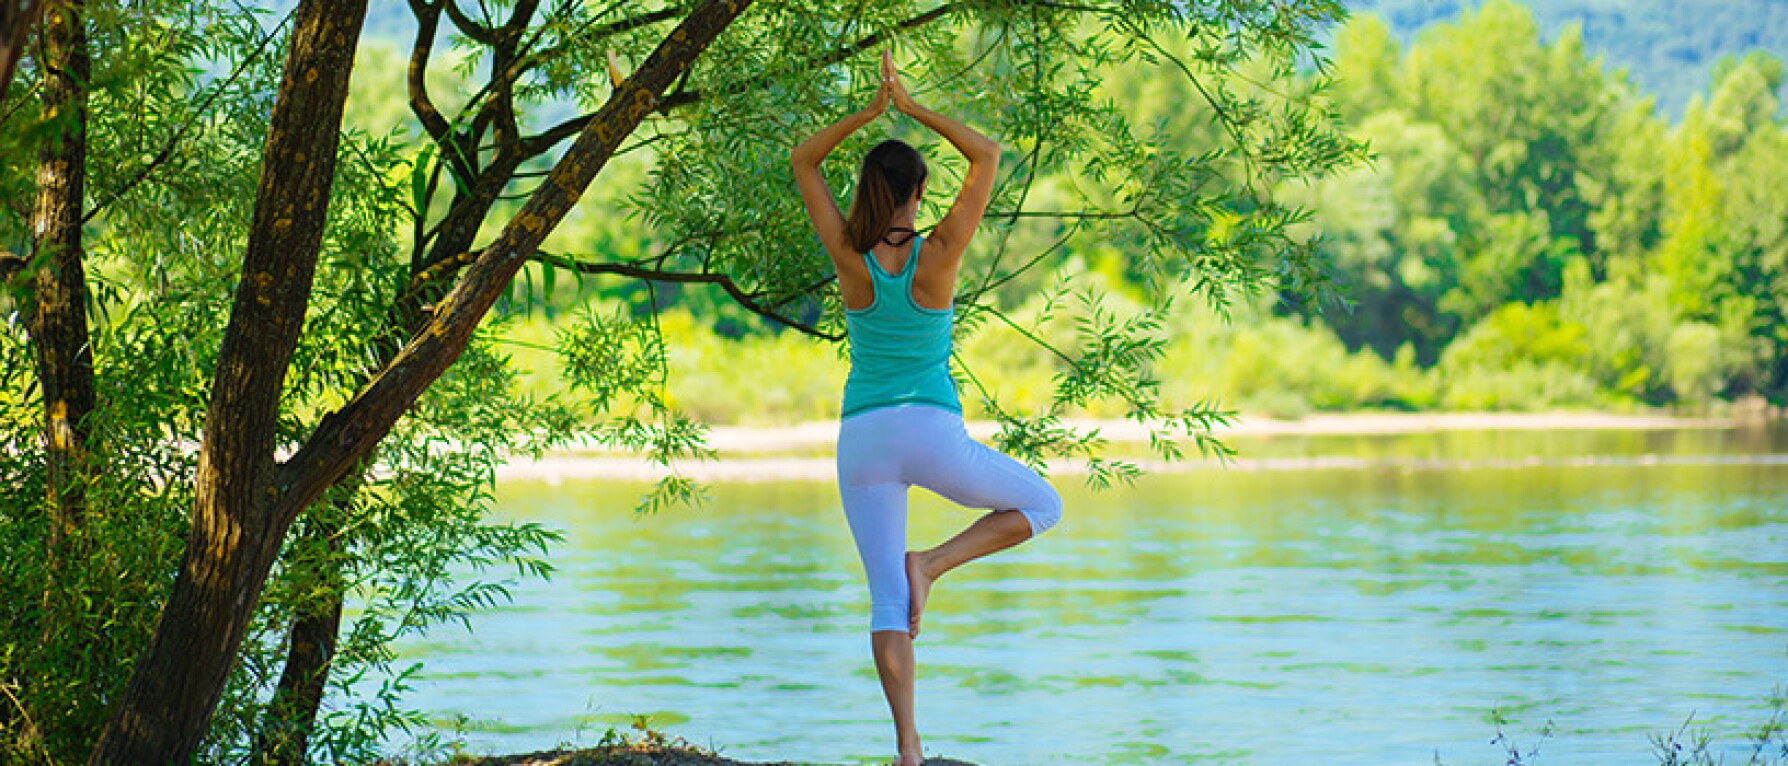 Yoga nature Free Stock Photos, Images, and Pictures of Yoga nature